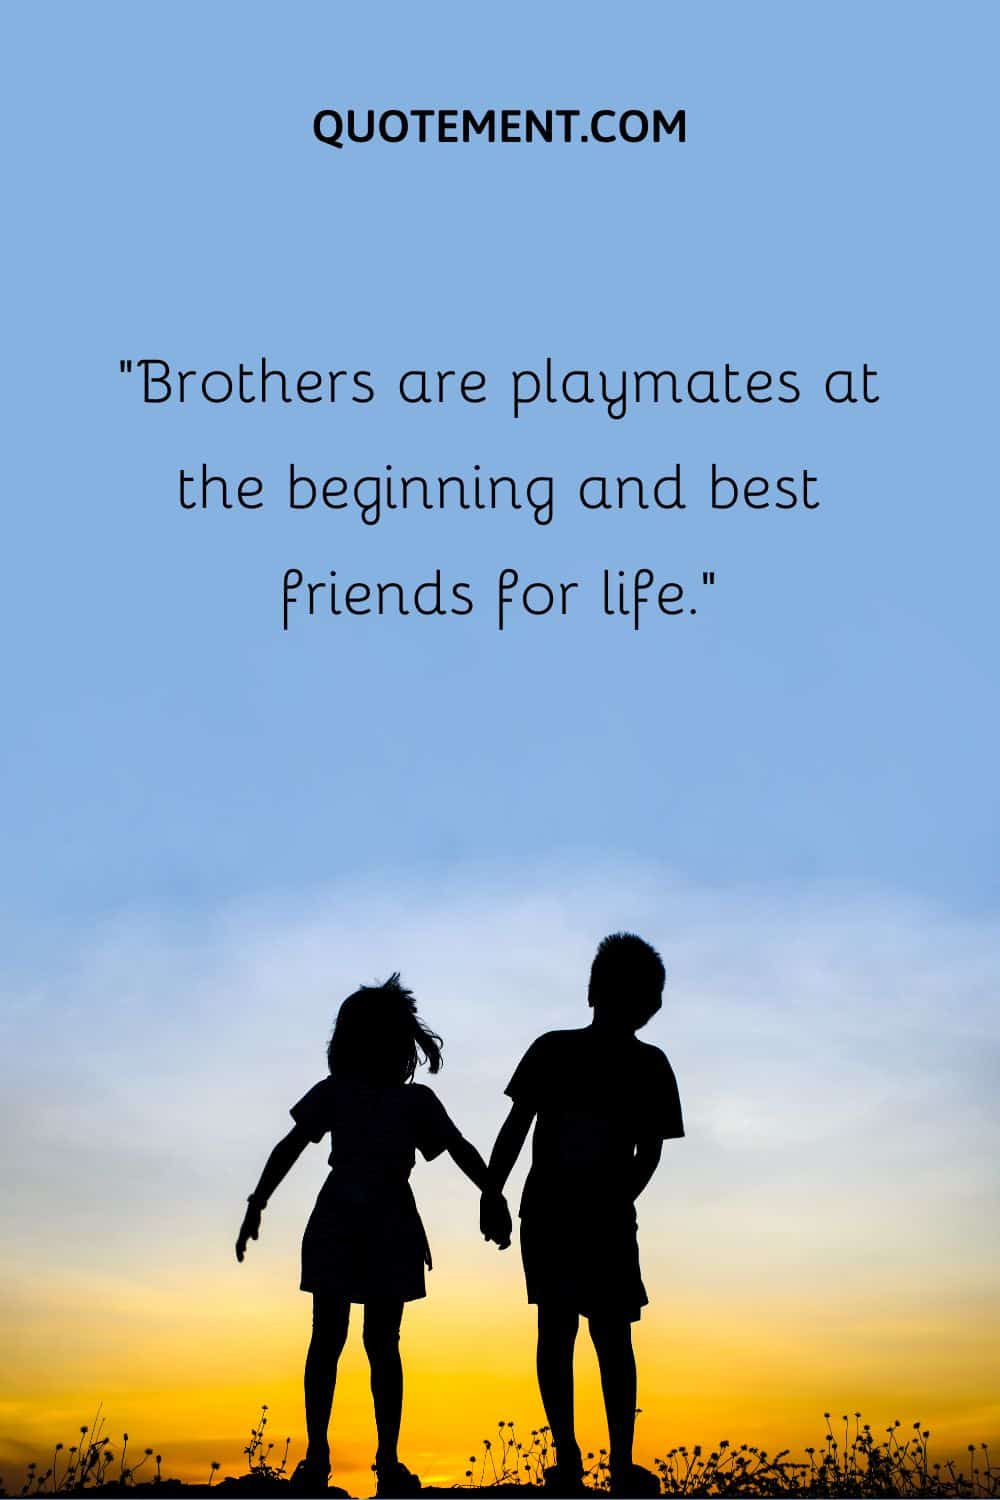 “Brothers are playmates at the beginning and best friends for life.”